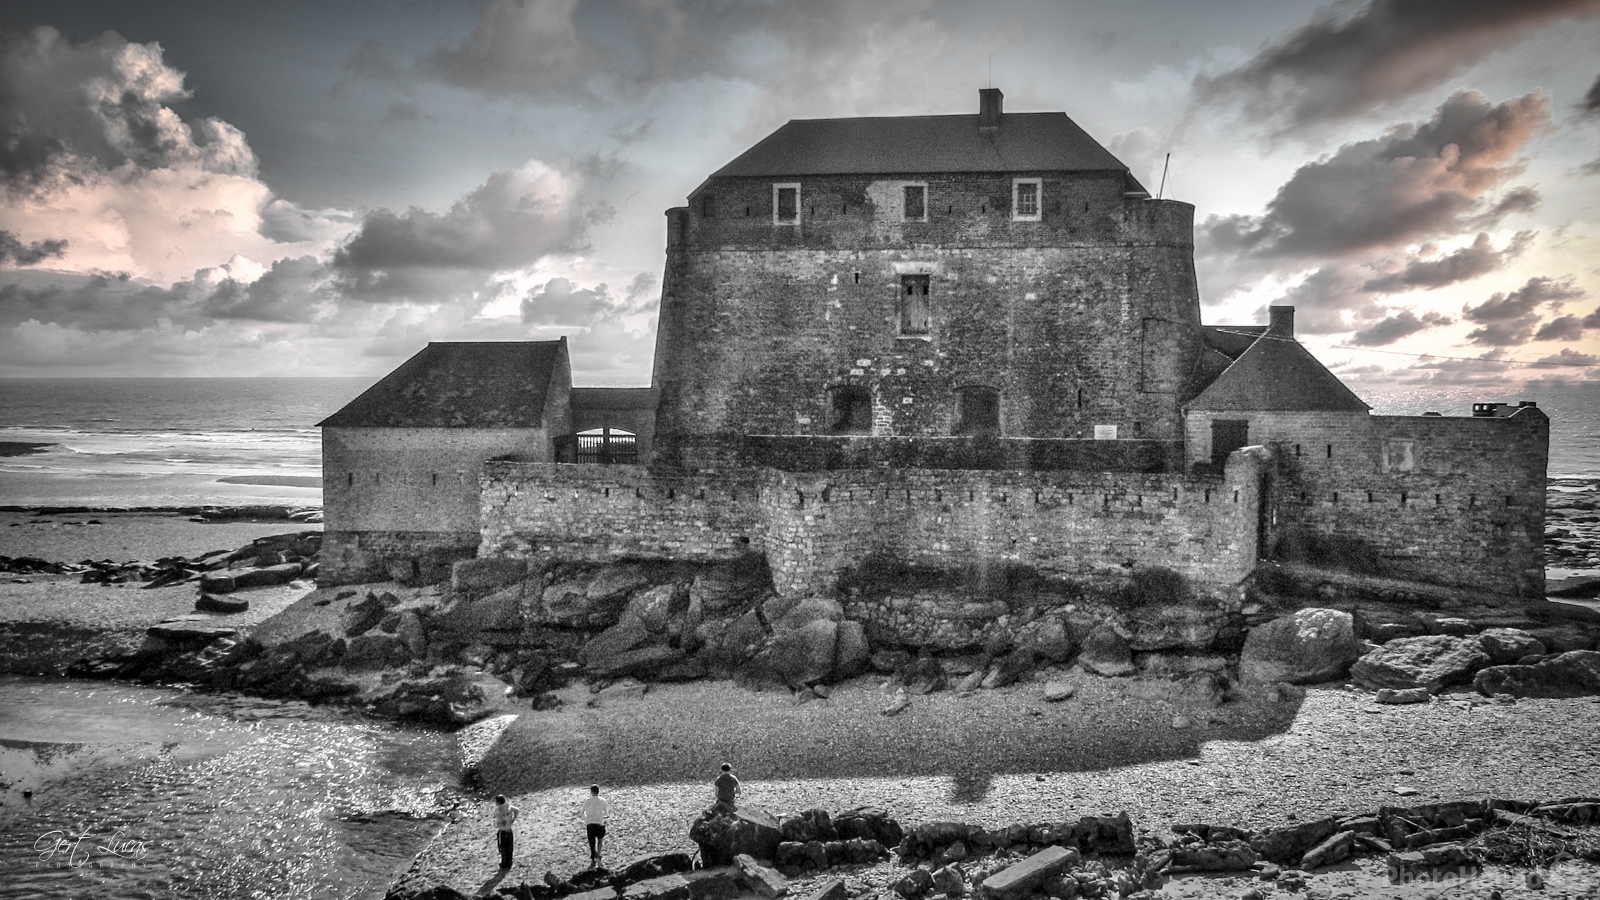 Image of Ambleteuse Fortres (exterior) by Gert Lucas